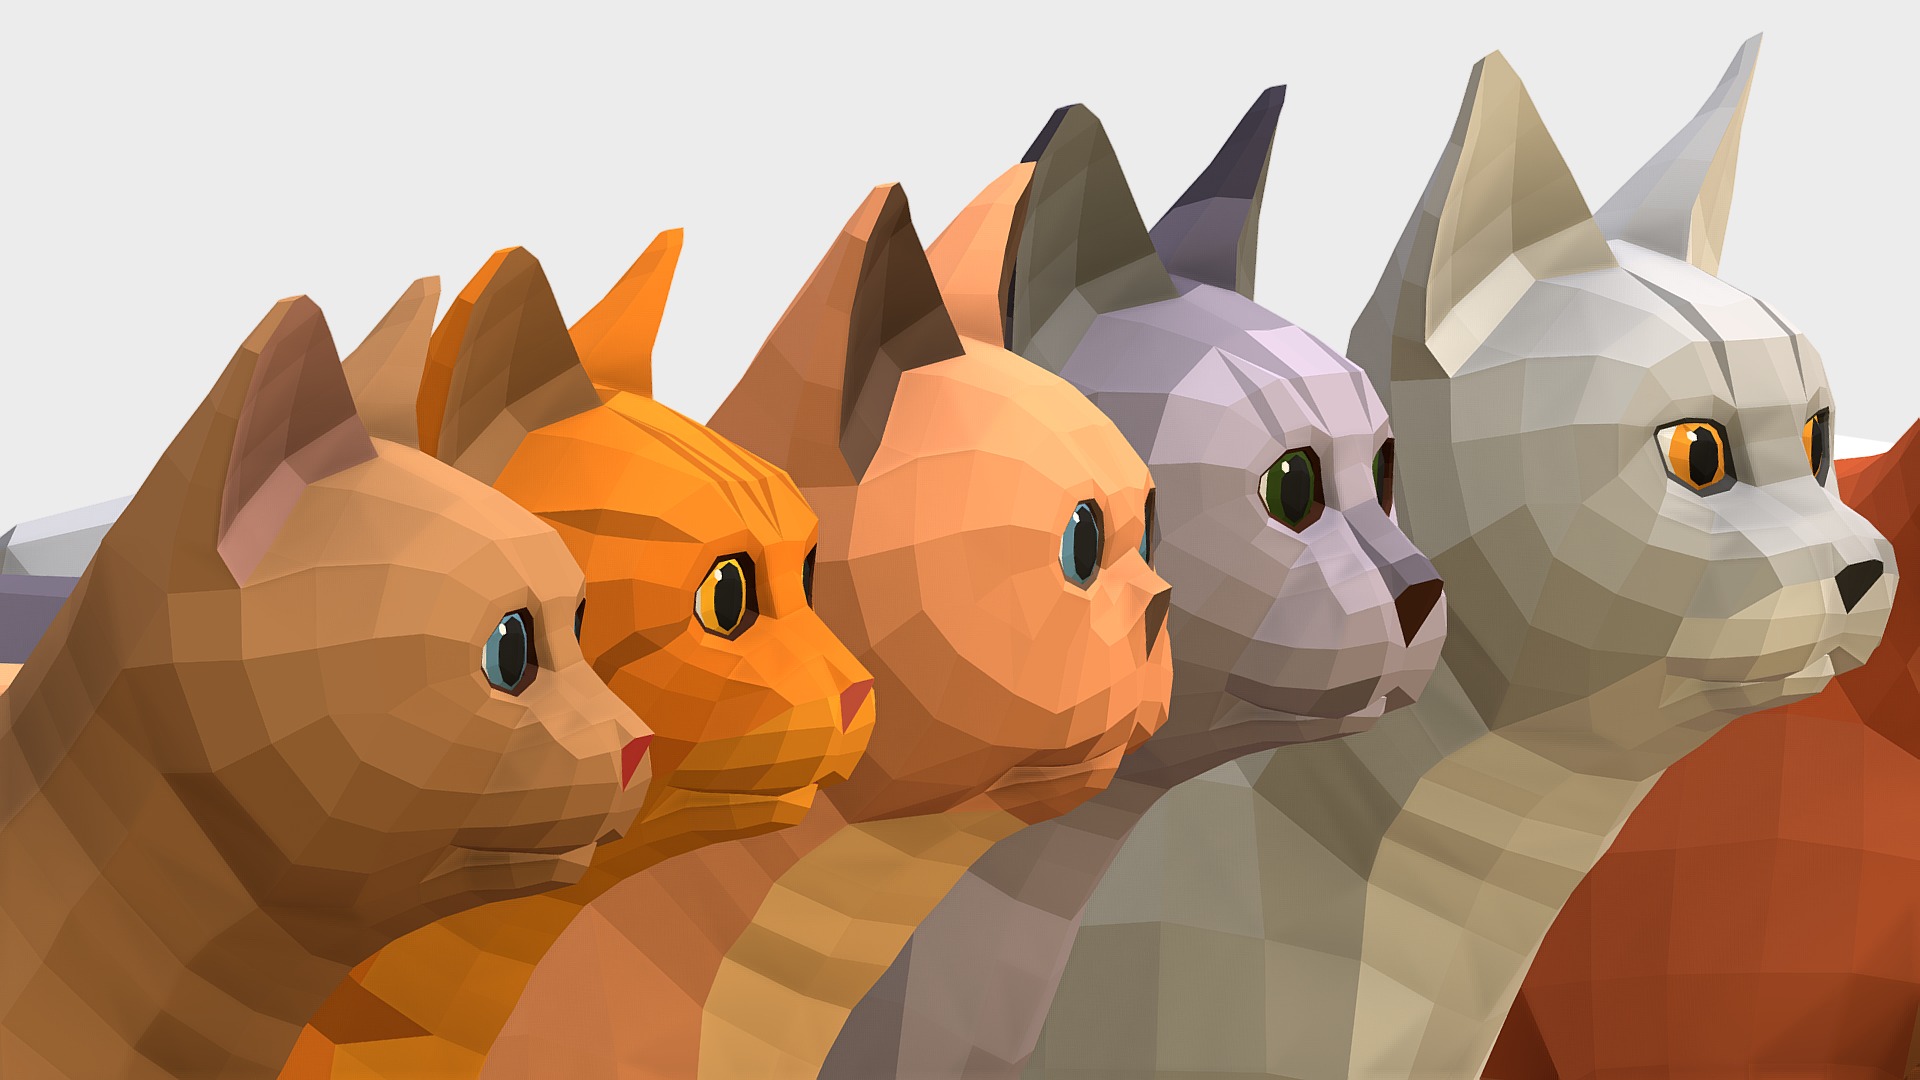 3D model LowPoly Cats - This is a 3D model of the LowPoly Cats. The 3D model is about a group of cartoon characters.